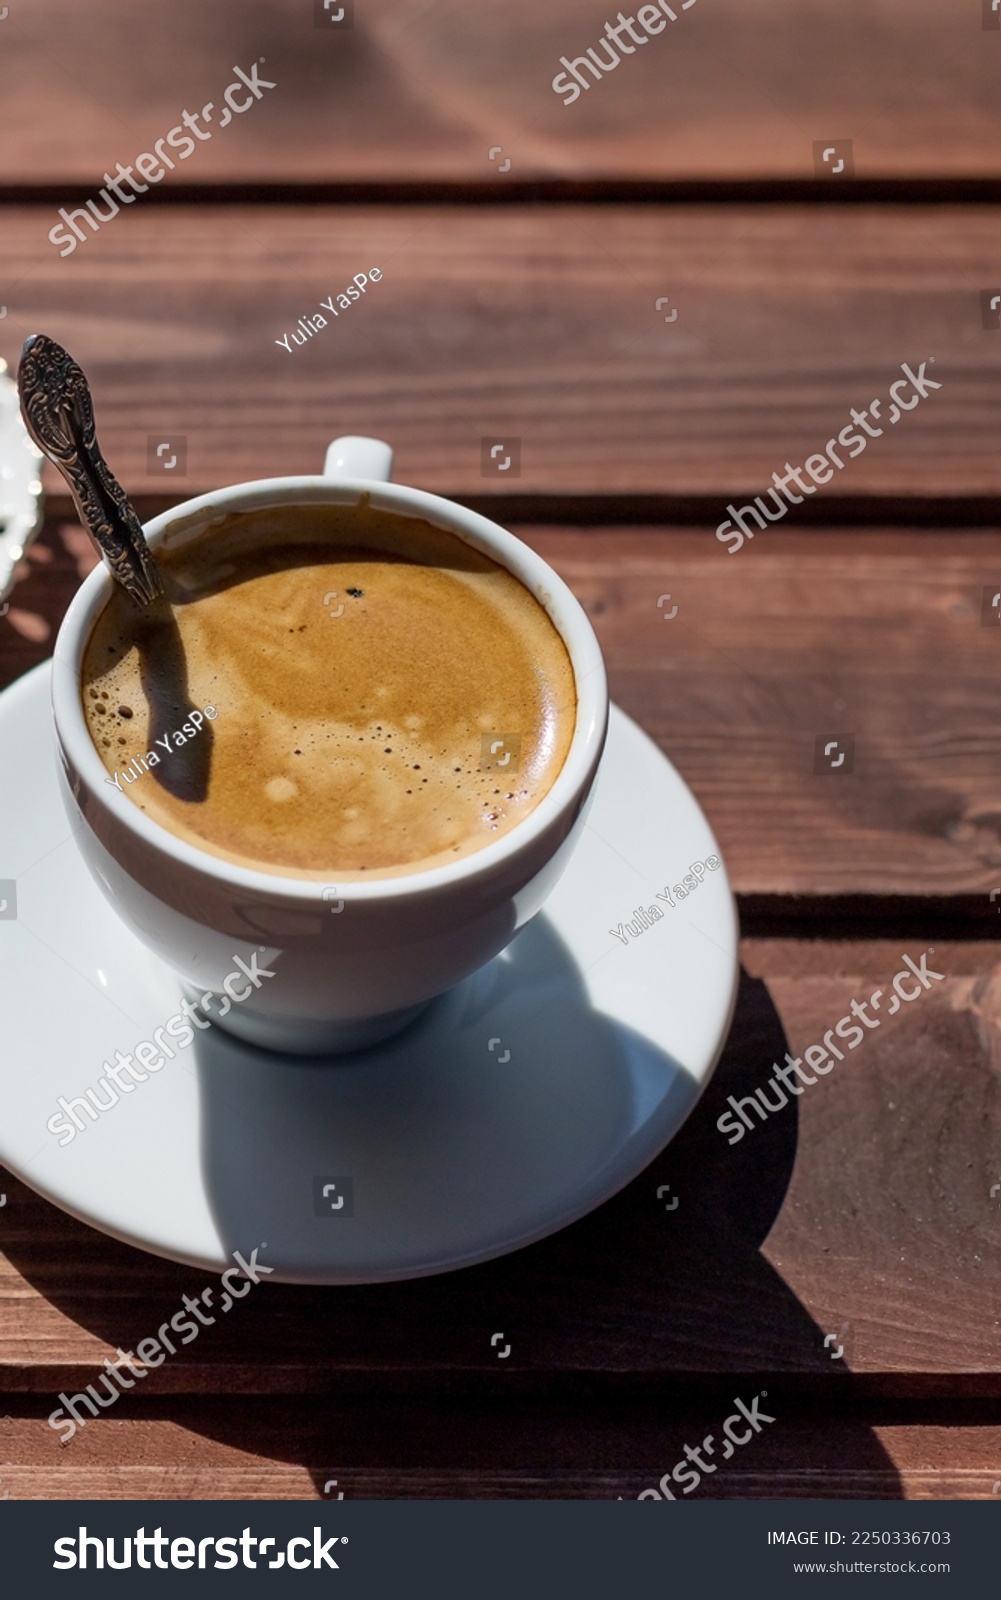 Cup of coffee with spoon on table. White porcelain cup on saucer. Copy space.Black Coffee in natural sun light.espresso on rustic wooden table. good morning concept #2250336703